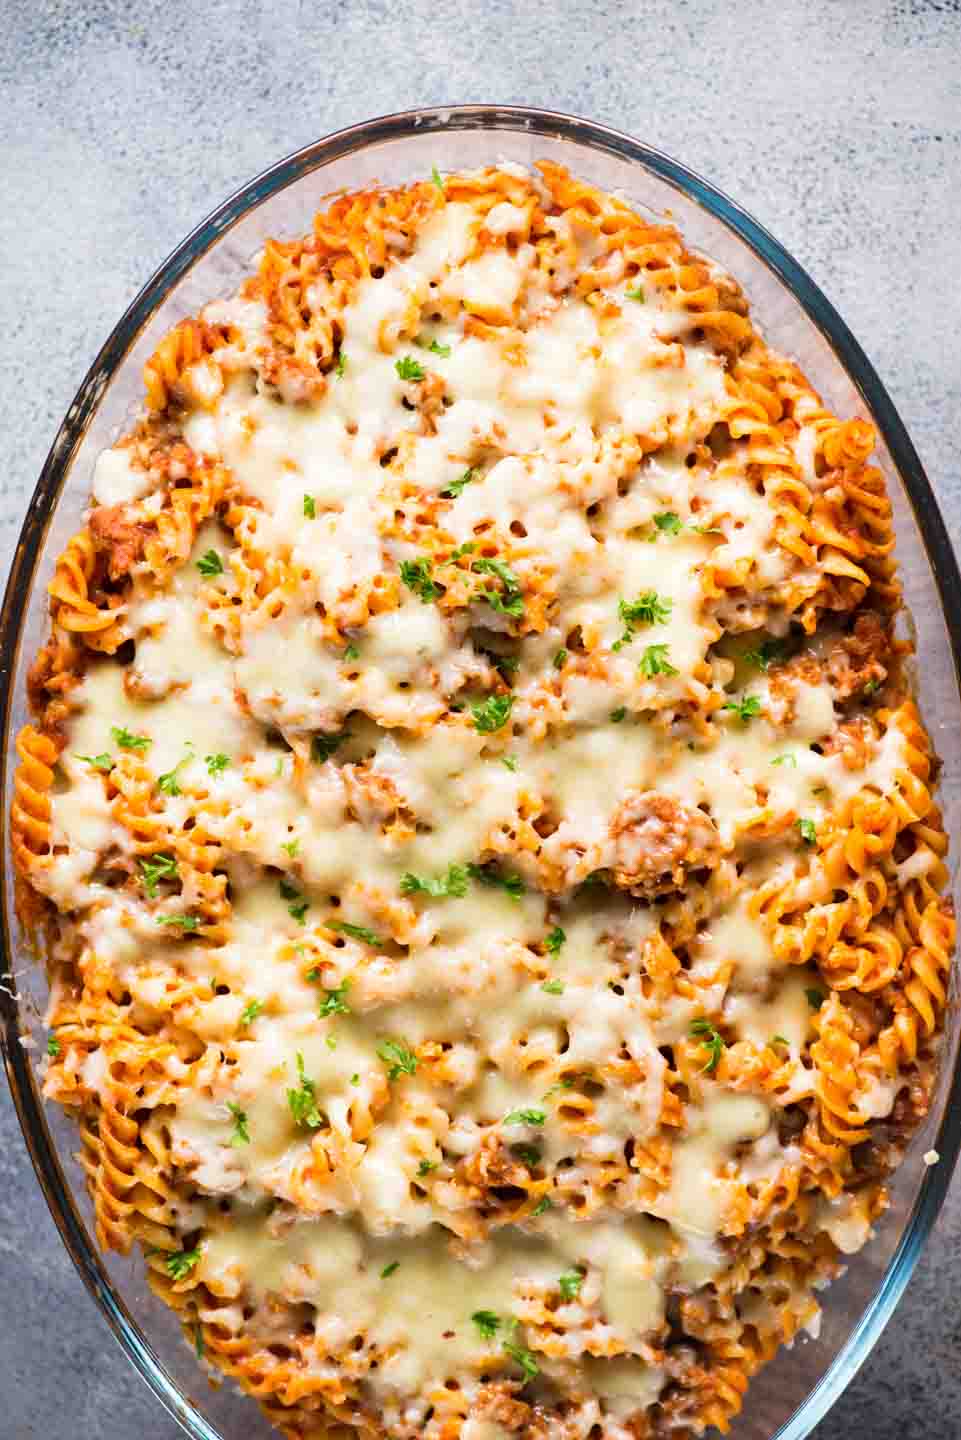 Our favourite Pasta Bake - tangy tomato sauce, spicy Italian Sausage and lots of cheese together makes this baked pasta dish delicious and super satisfying. 